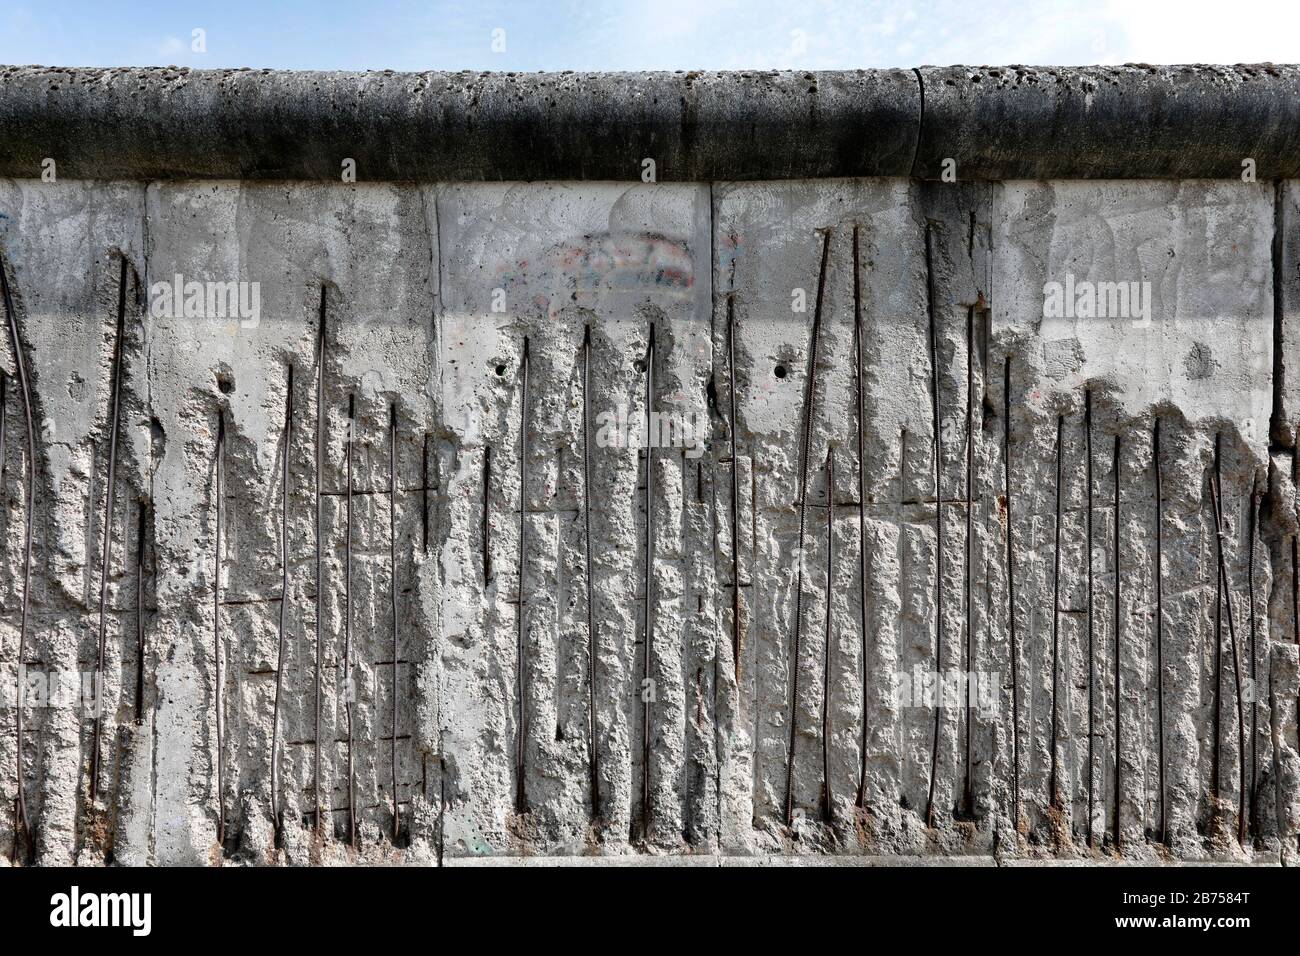 Remains of the Berlin Wall on Bernauer Strasse. This year, on November 9, 2019, the fall of the Berlin Wall will be the 30th anniversary of its fall. [automated translation] Stock Photo